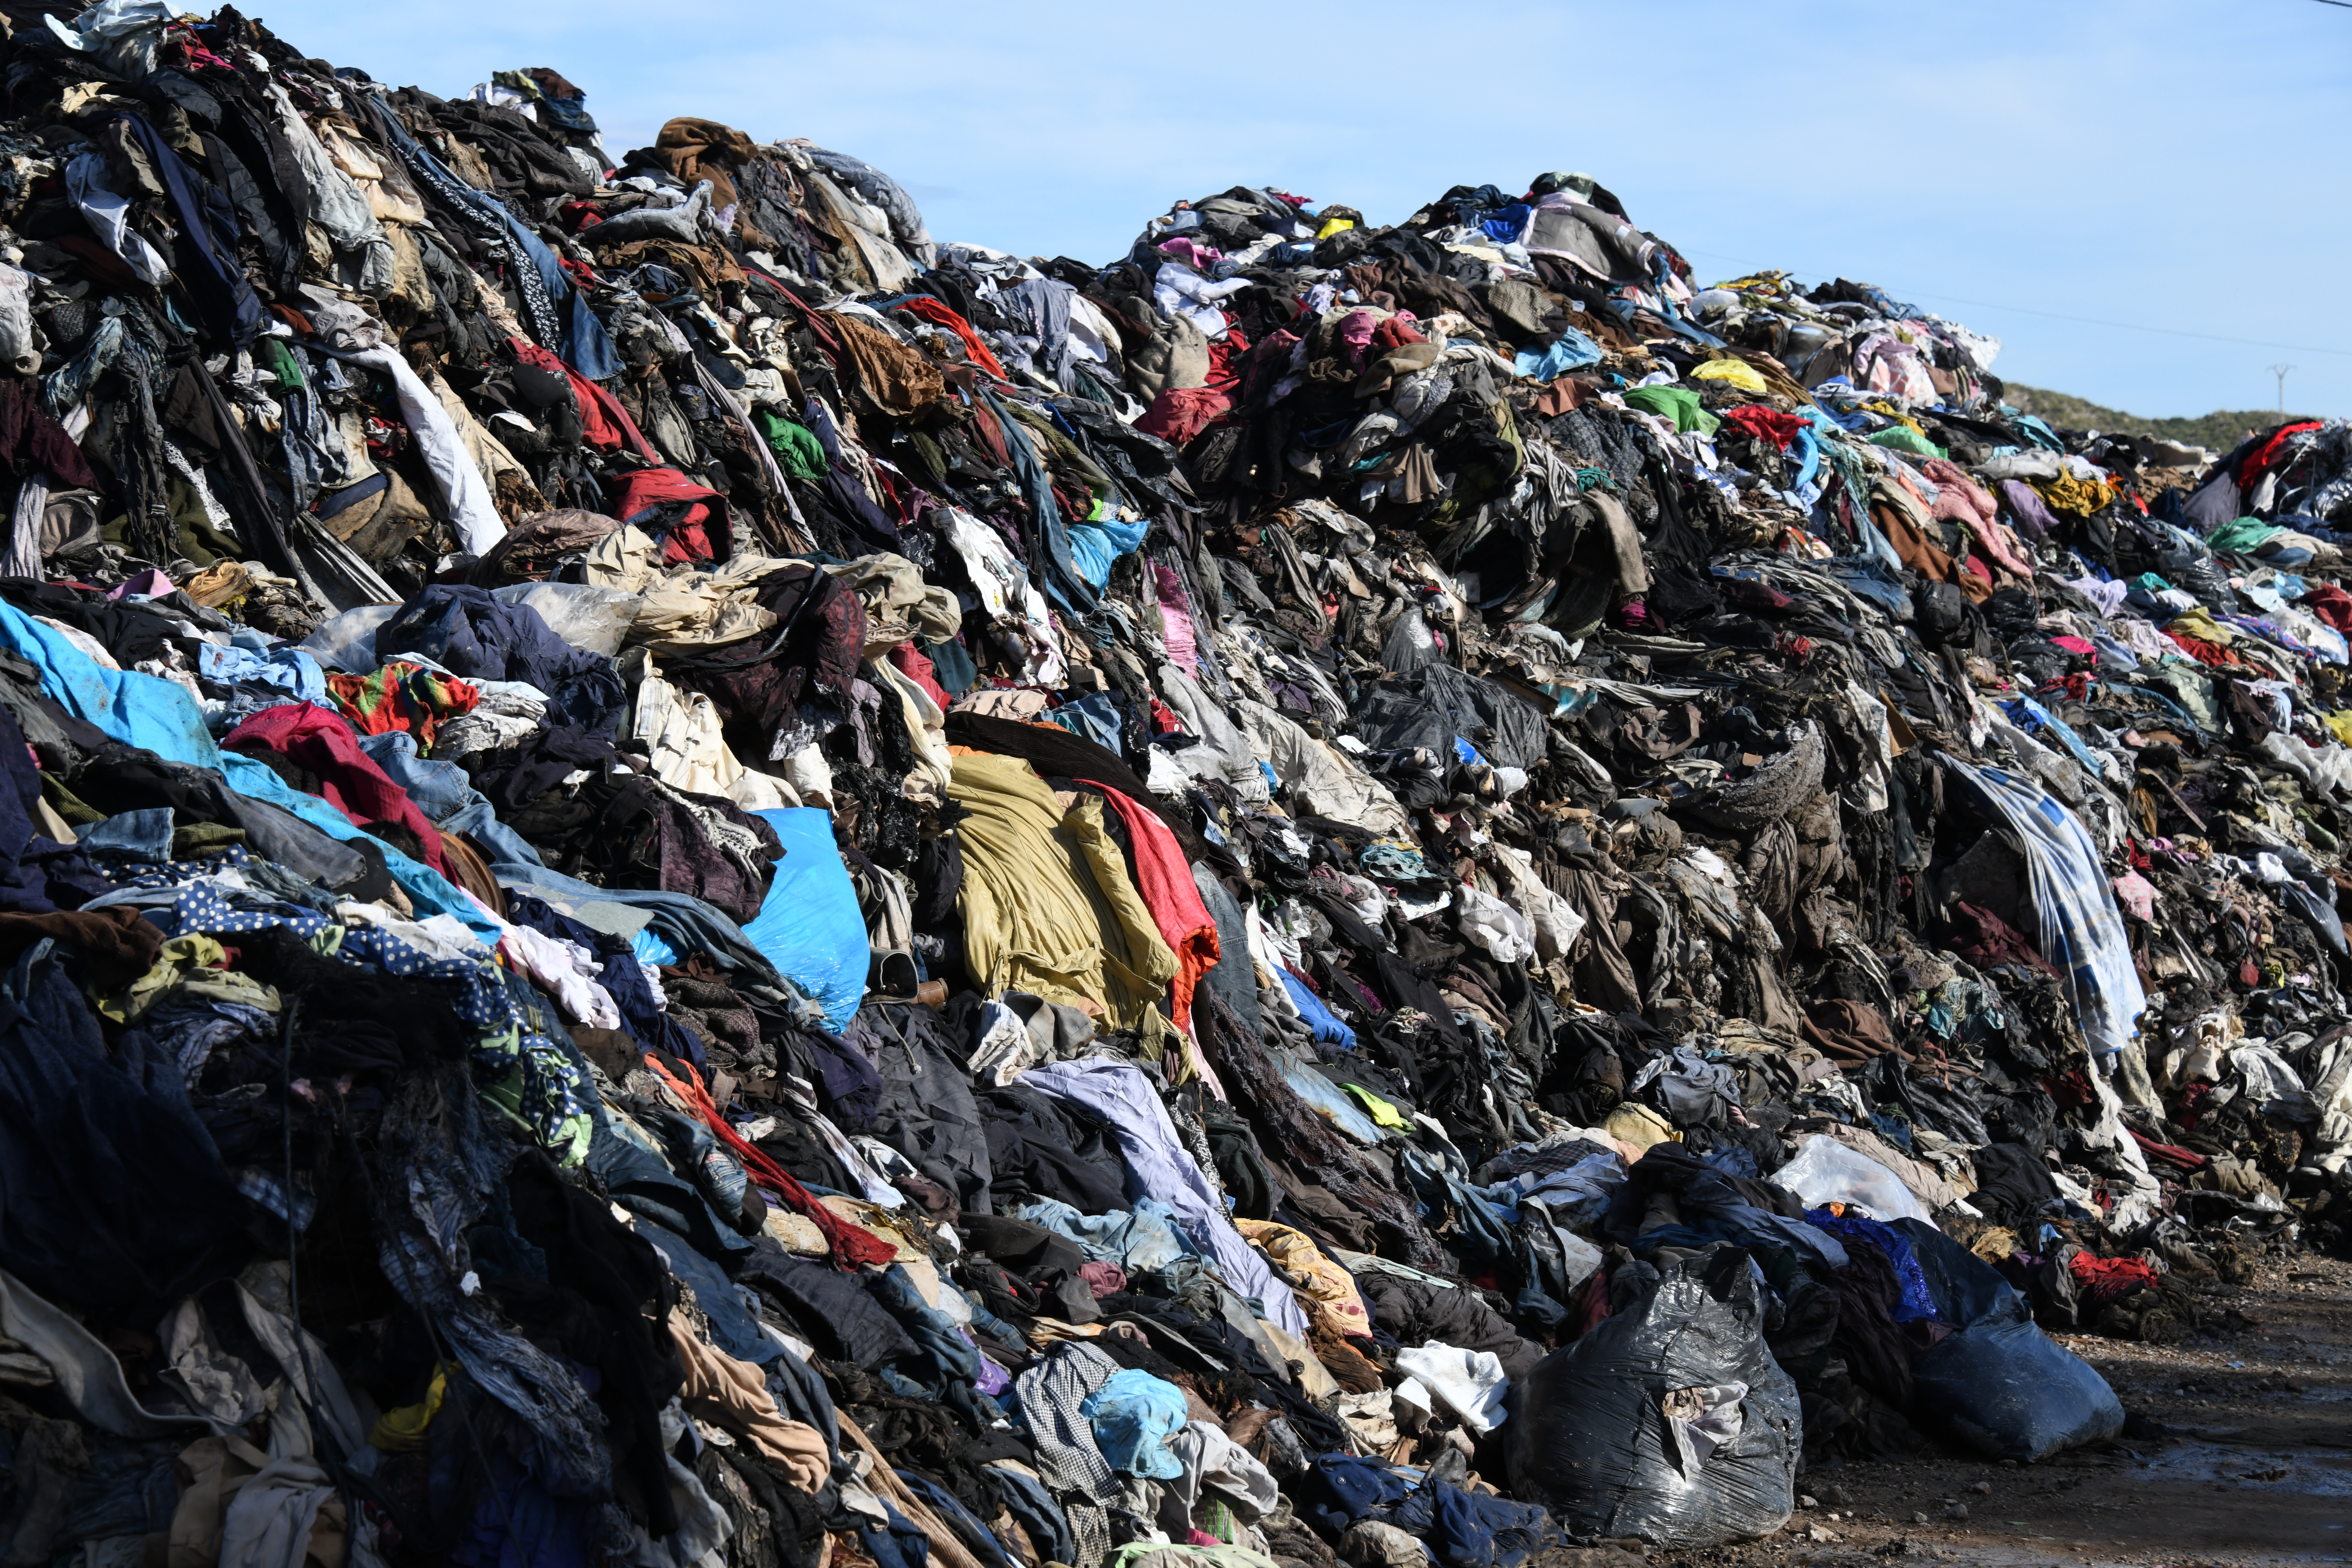 23 million returned garments sent to landfill or incinerated last year, report finds